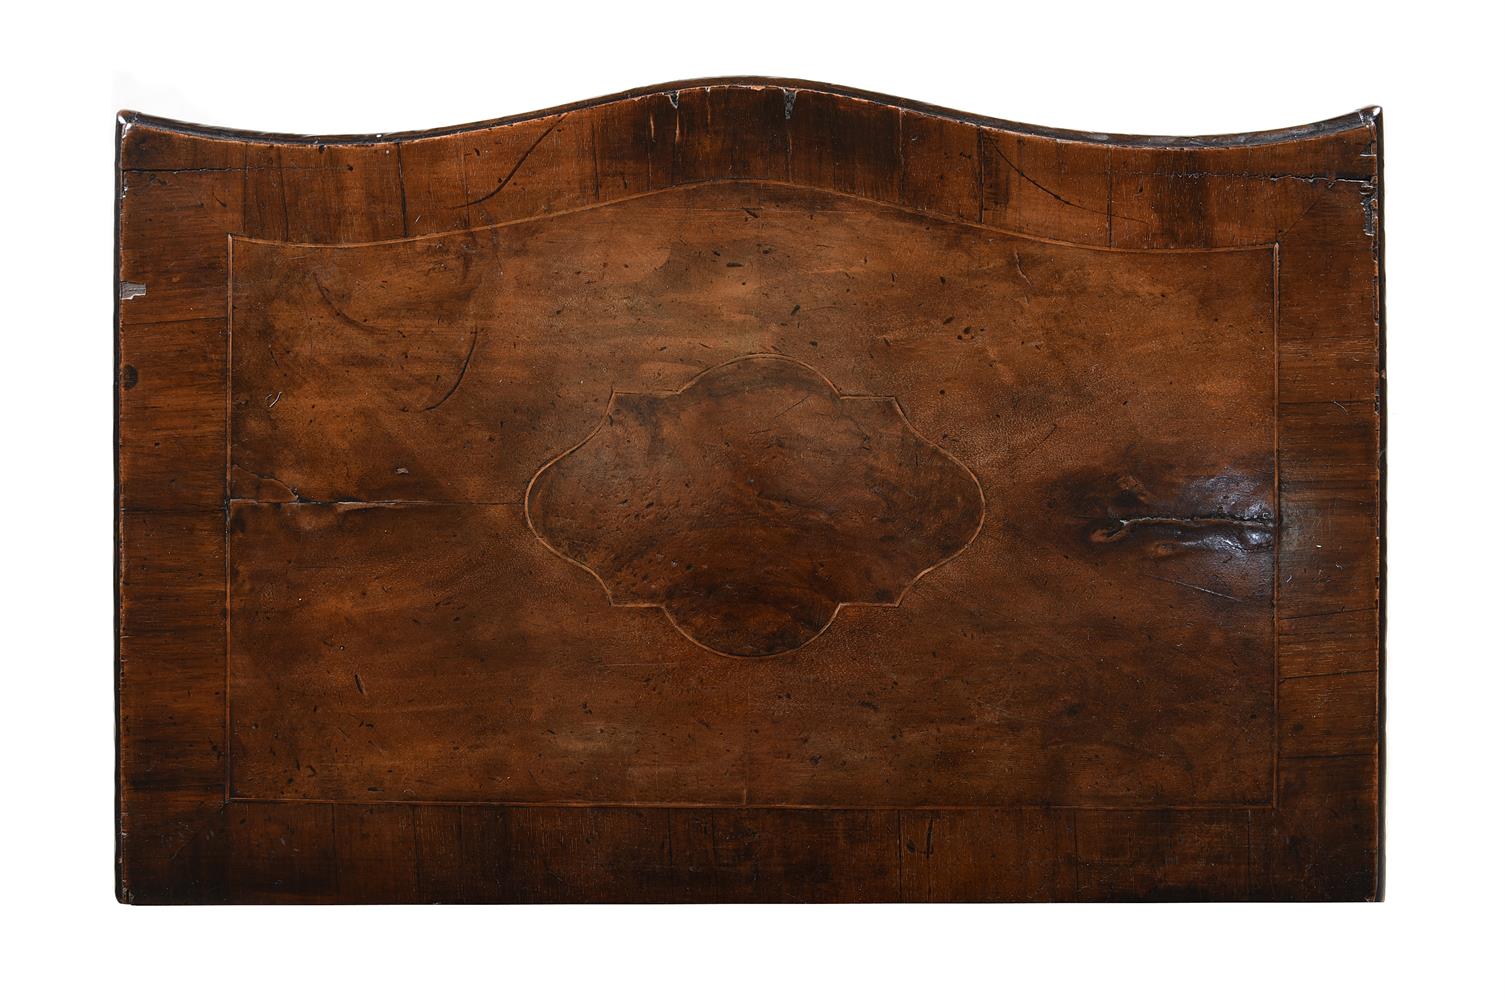 A WALNUT SERPENTINE CHEST OR COMMODE - Image 4 of 5